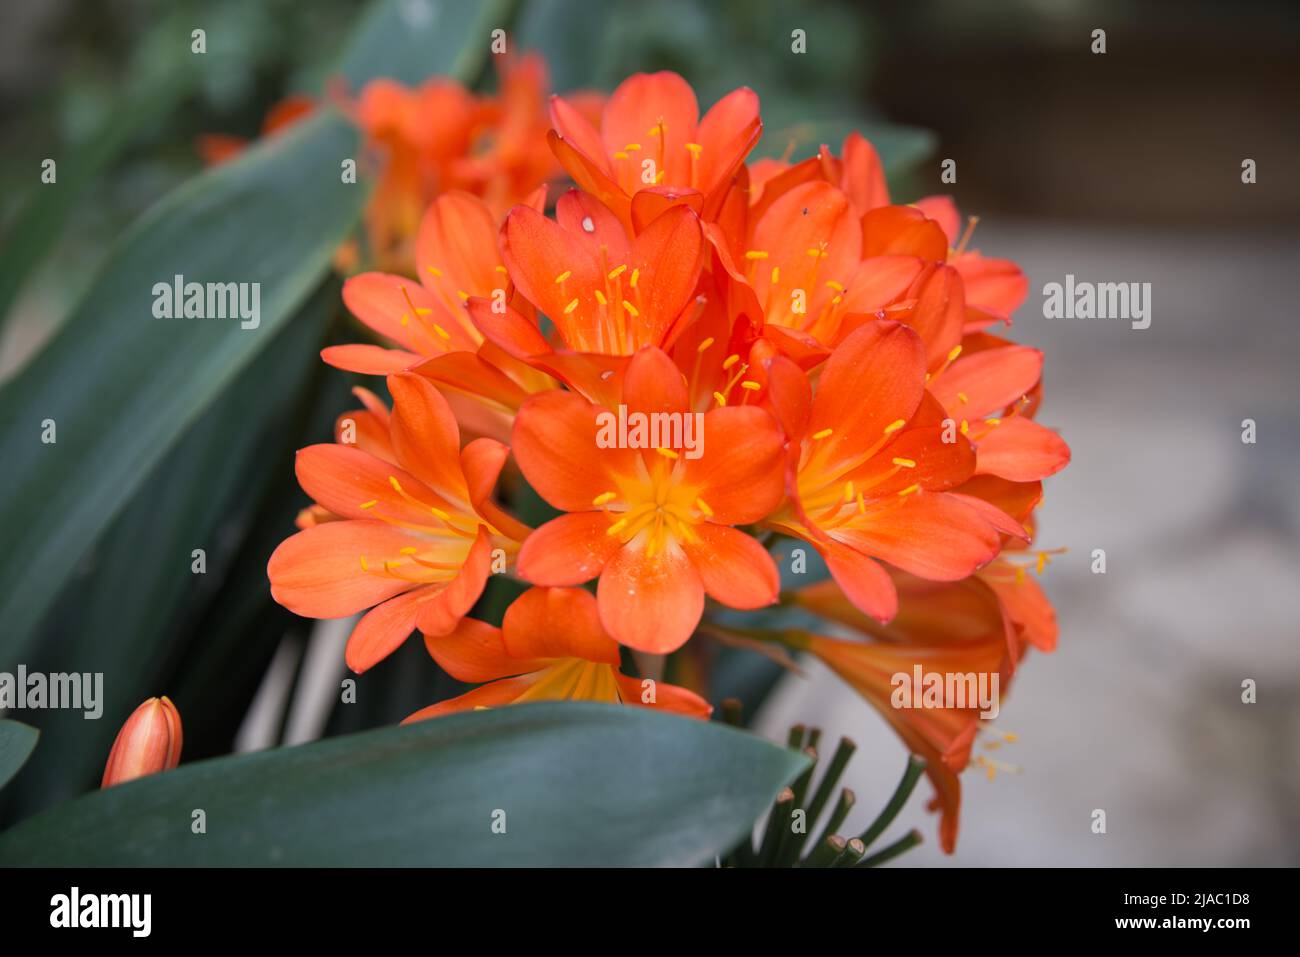 Beautiful flowers of clivia or bush lily. Vibrant orange color. Madrid, Spain Stock Photo